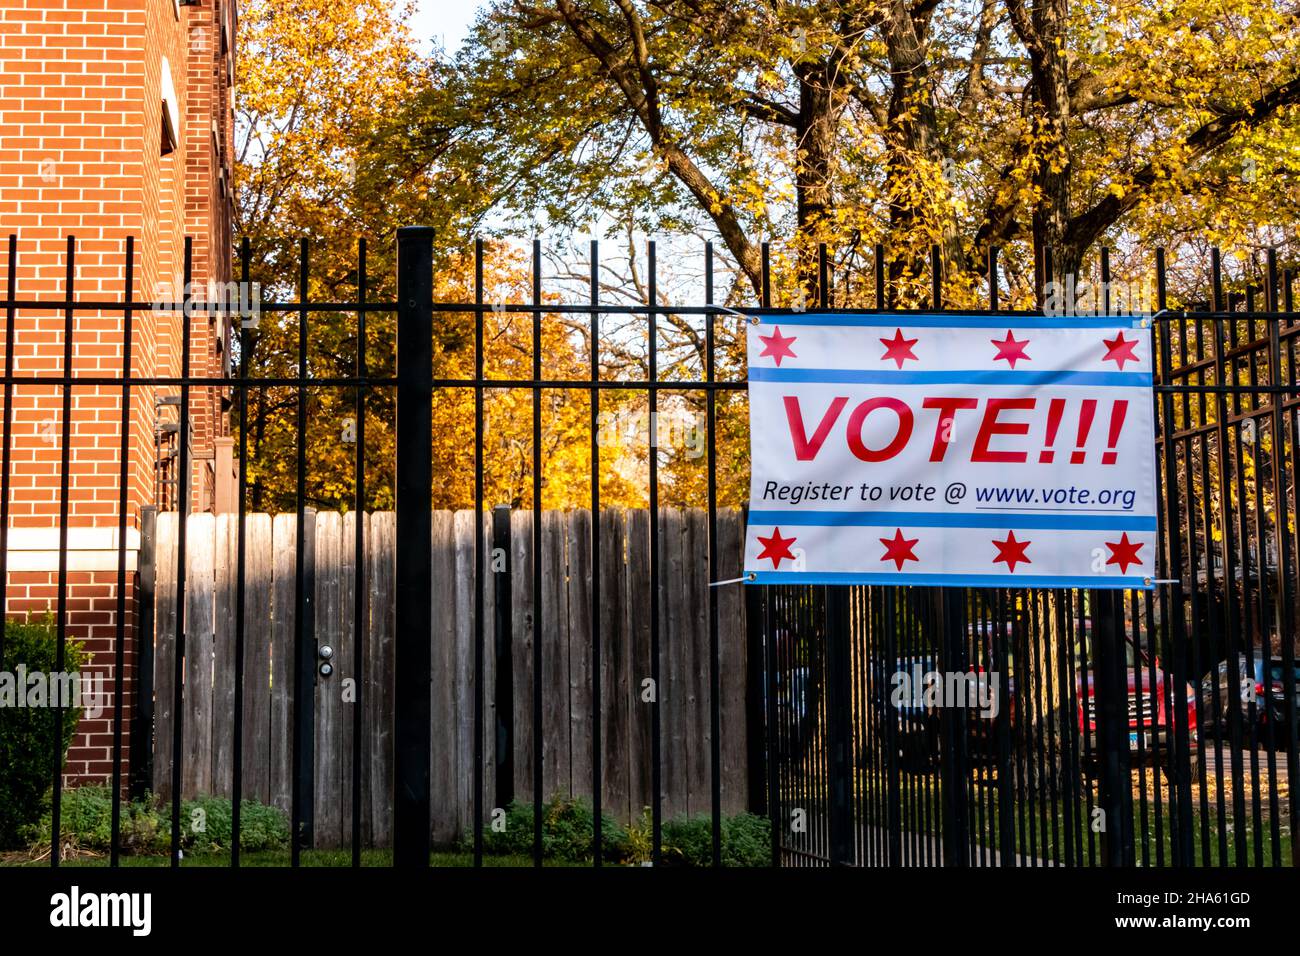 Register to Vote banner affixed to a black wrought iron fence, in a residential neighborhood. Stock Photo